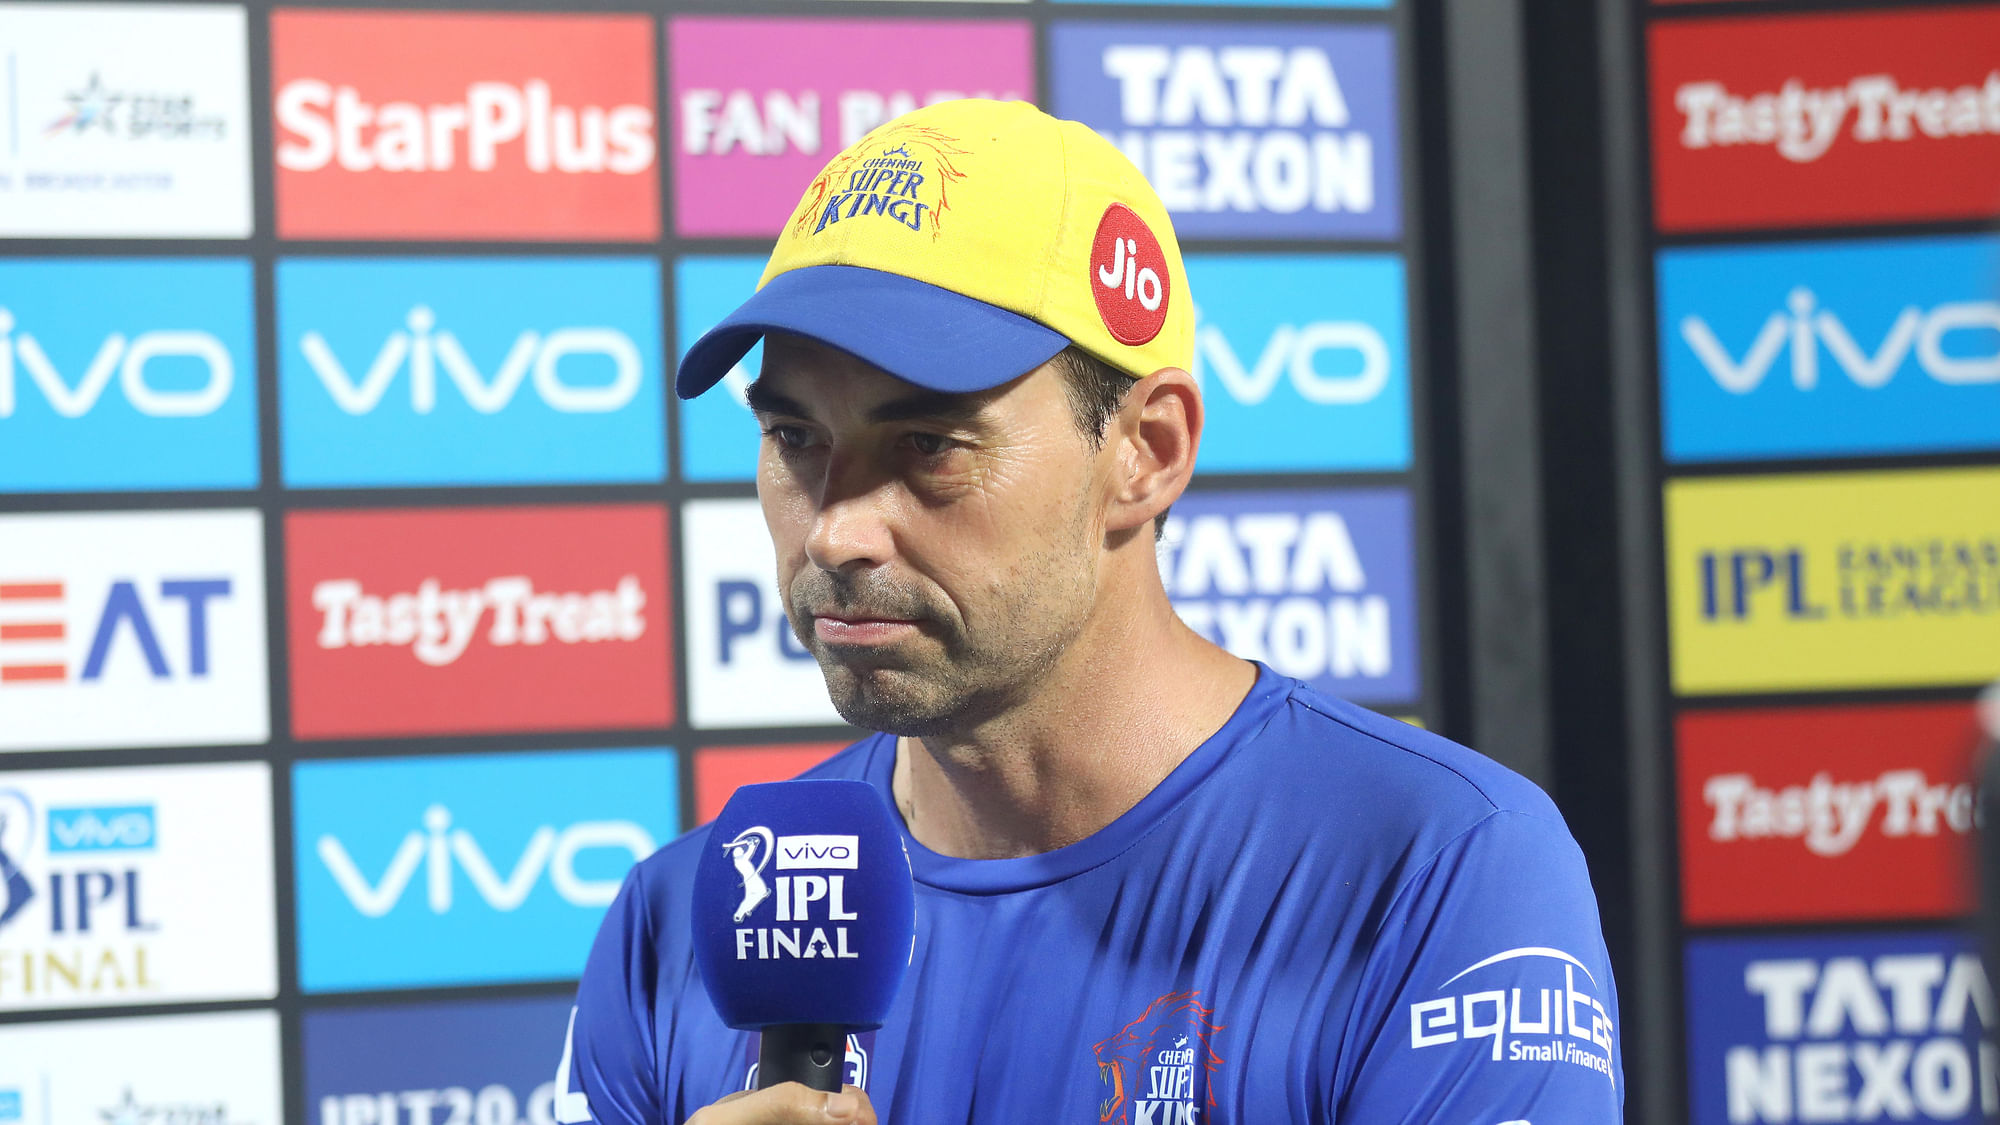 Chennai Super Kings head coach Stephen Fleming has admitted that his franchise experienced a difficult time during the two-year ban from the IPL.